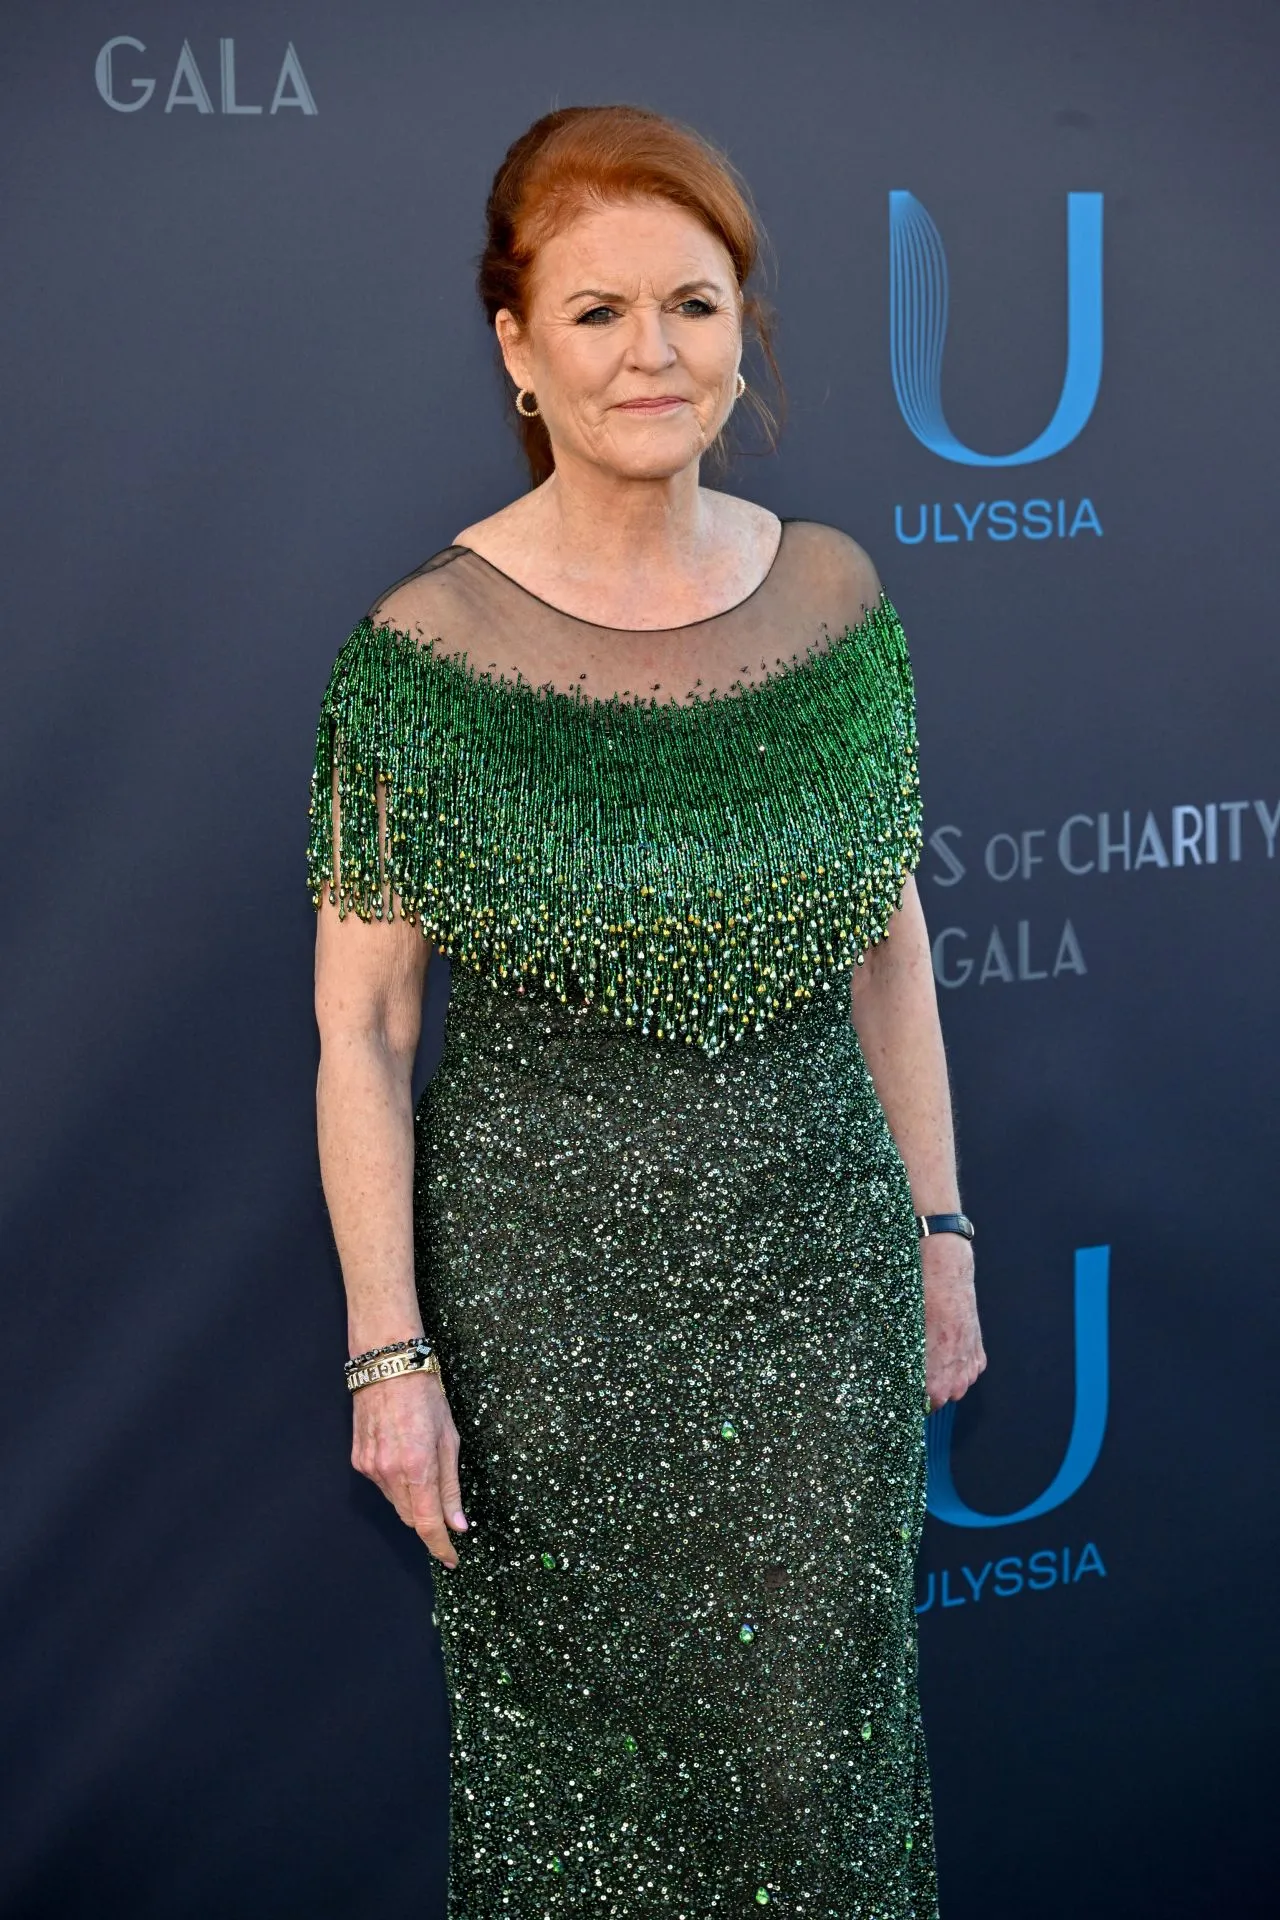 SARAH FERGUSON AT KNIGHTS OF CHARITY GALA AT CANNES FILM FESTIVAL2